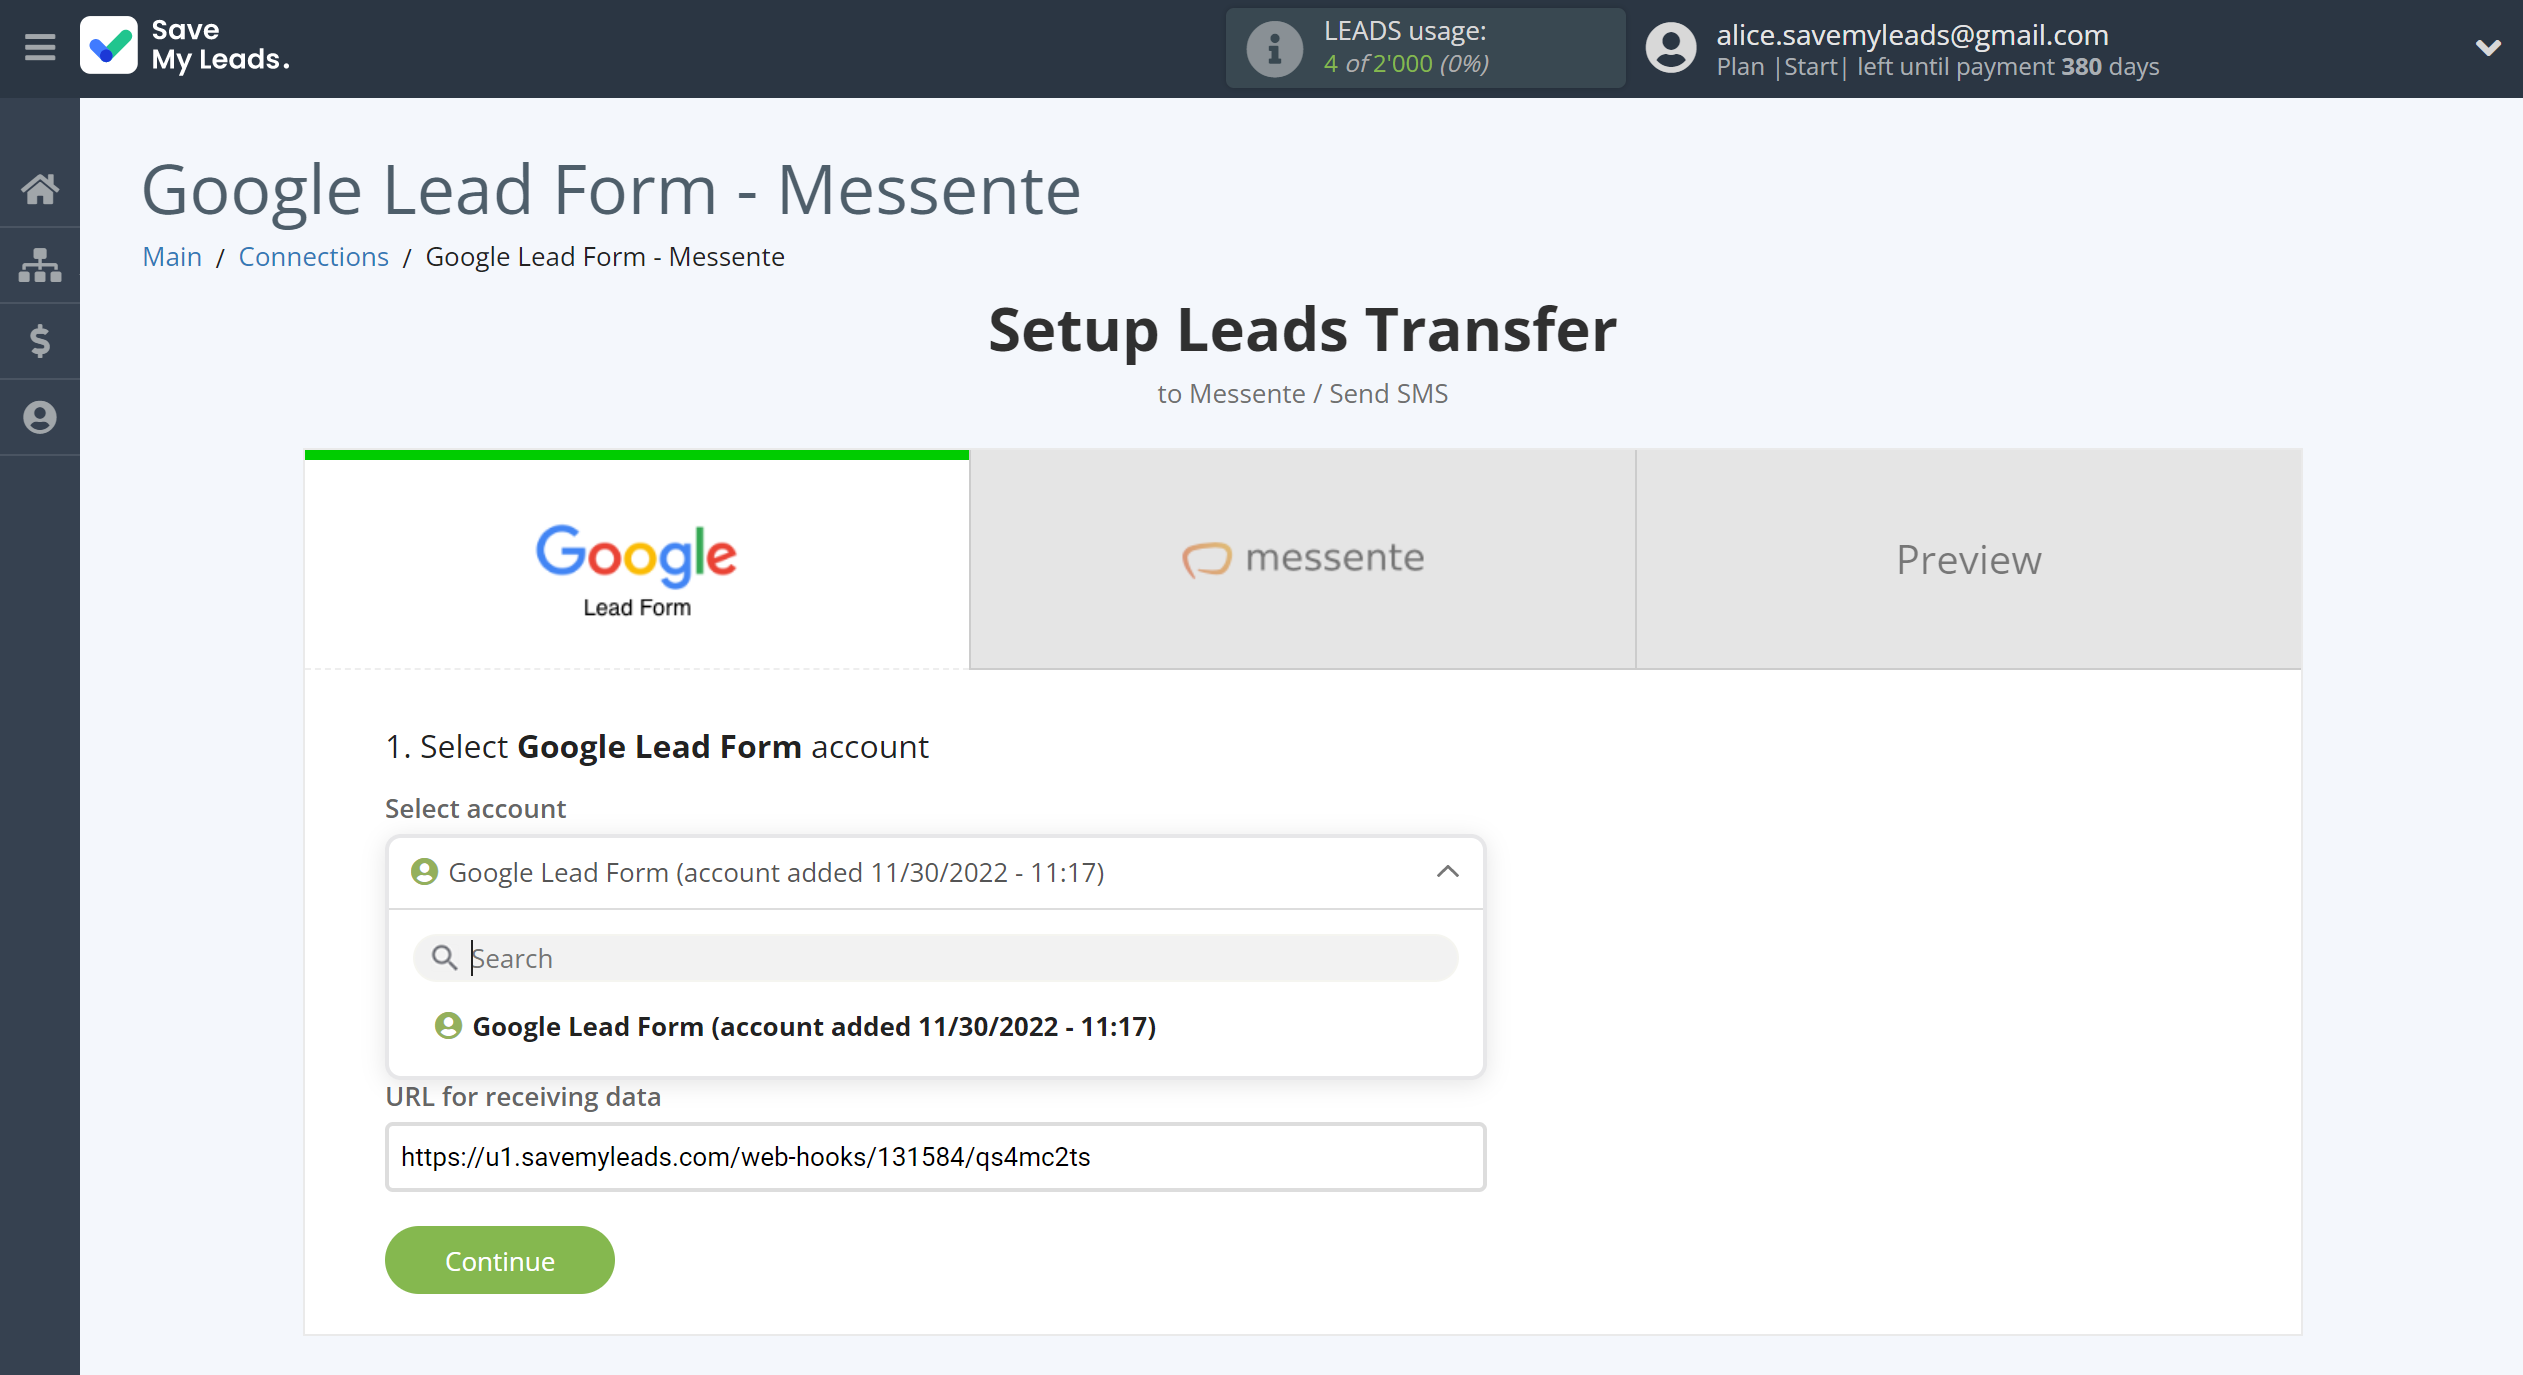 How to Connect Google Lead Form with Messente | Data Source account selection